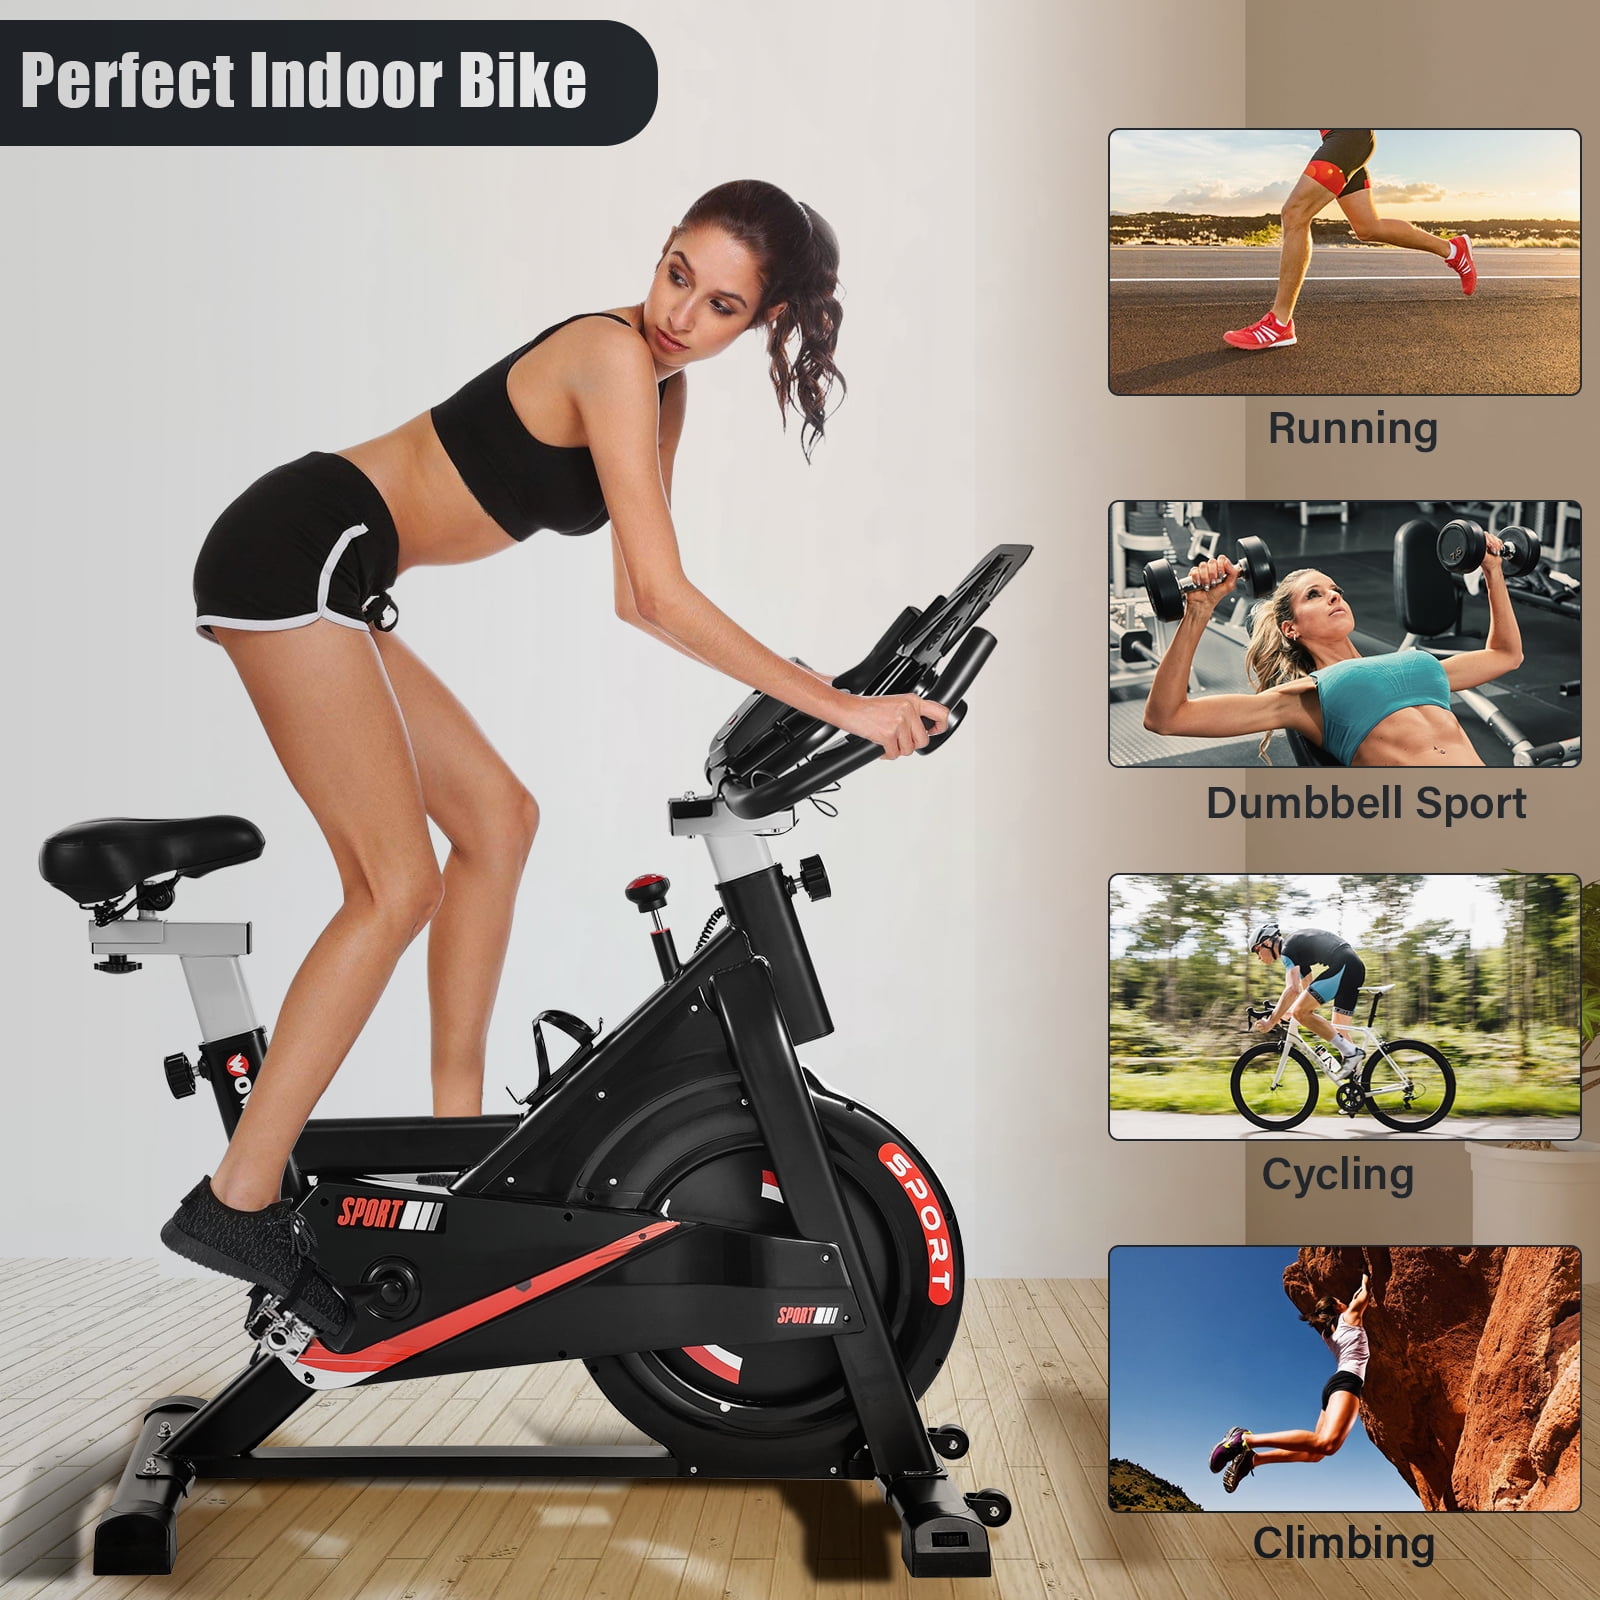 Details about   Stationary Exercise Bike Bicycle Trainer Fitness Cardio Cycling Training Home US 